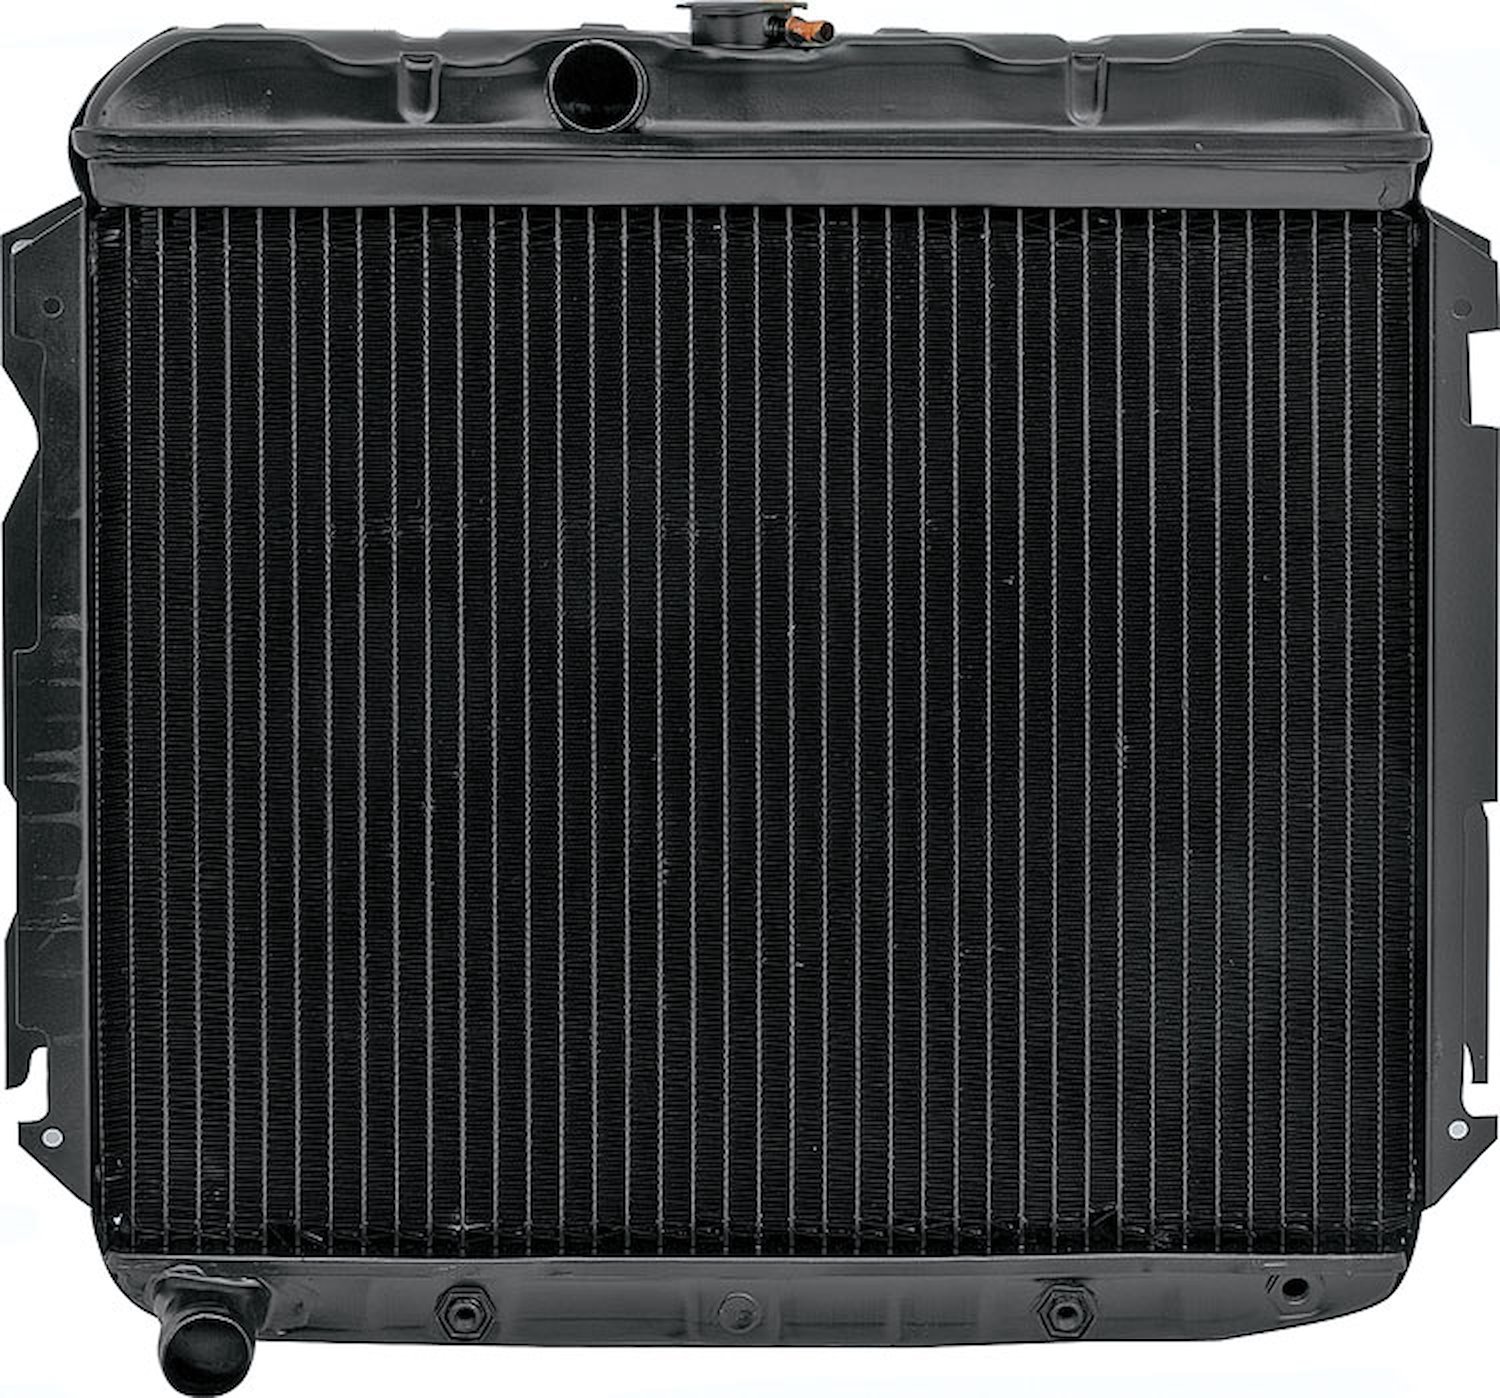 MB2367A Replacement Radiator 1966-69 Mopar B-Body V8 318Ci/340Ci With Automatic Trans 3 Row 22" Wide